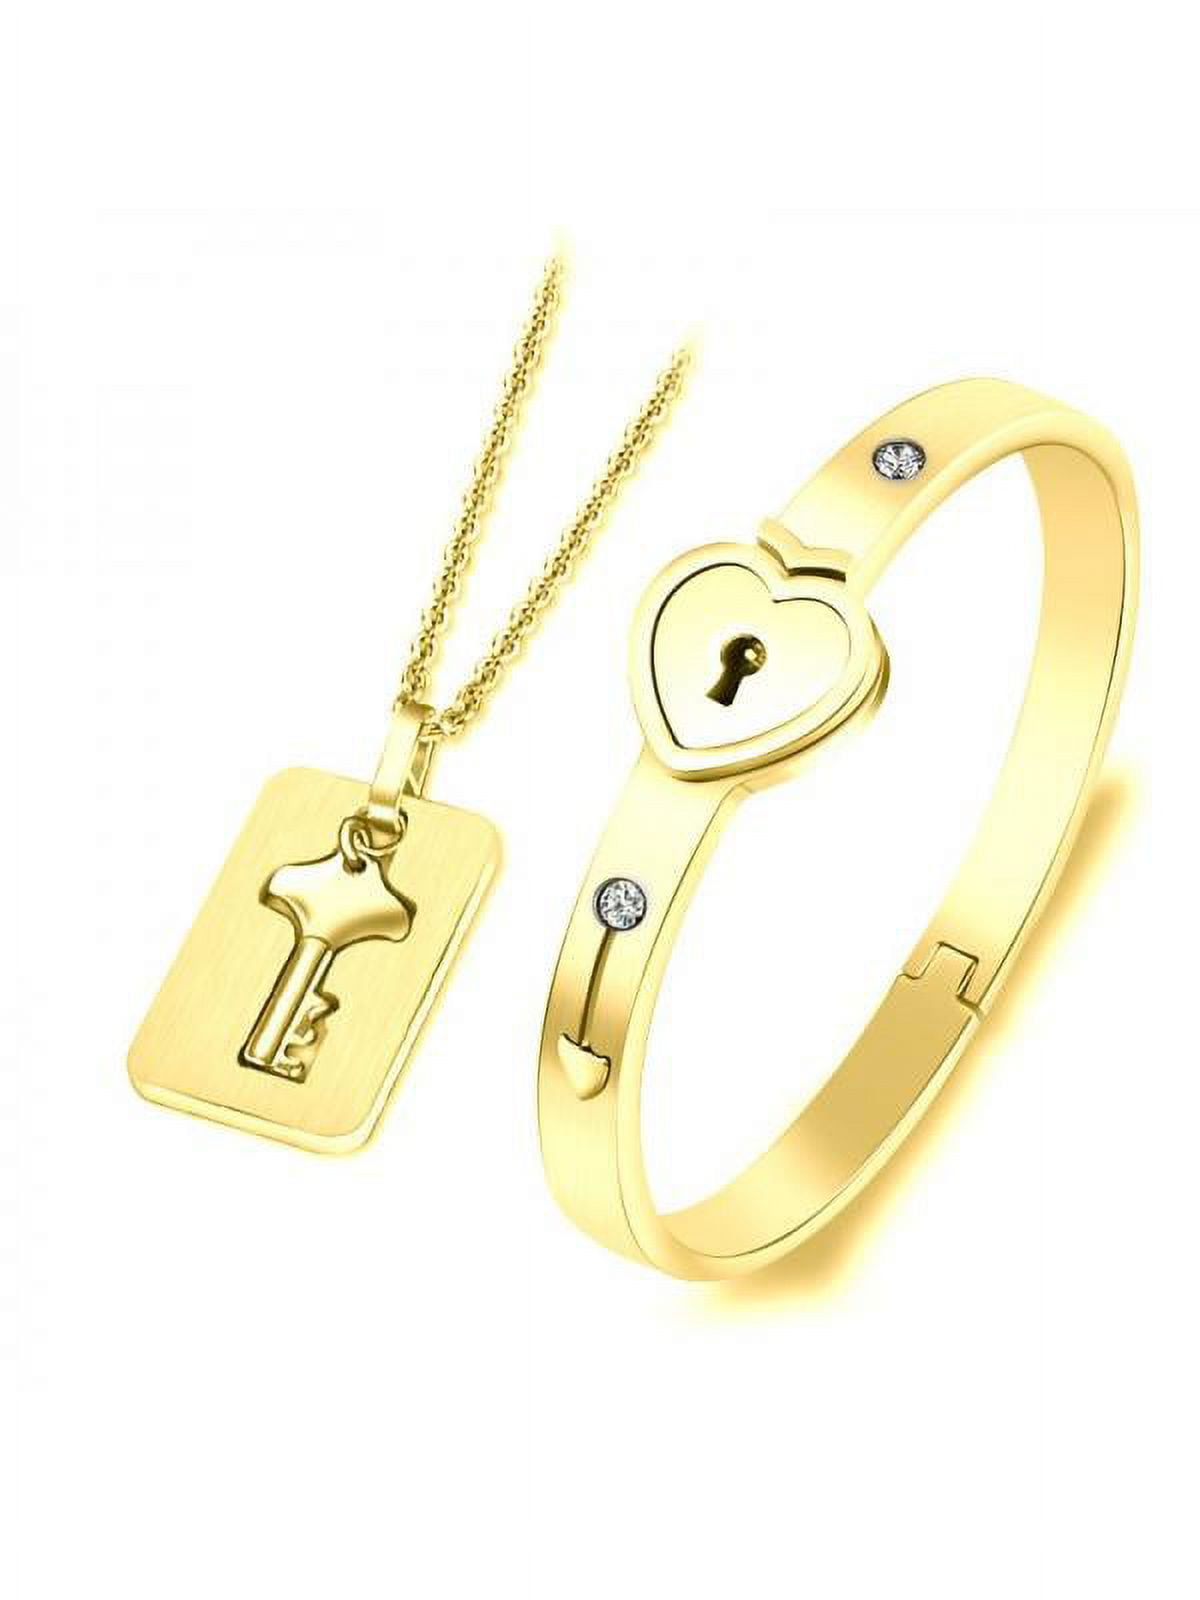 Buy La Belleza Men's and Women's Couple Heart Lock and Key Stainless Steel  Cubic Zirconia Bracelet Pendant Necklace Set for Lovers on Valentine day  (Golden) at Amazon.in